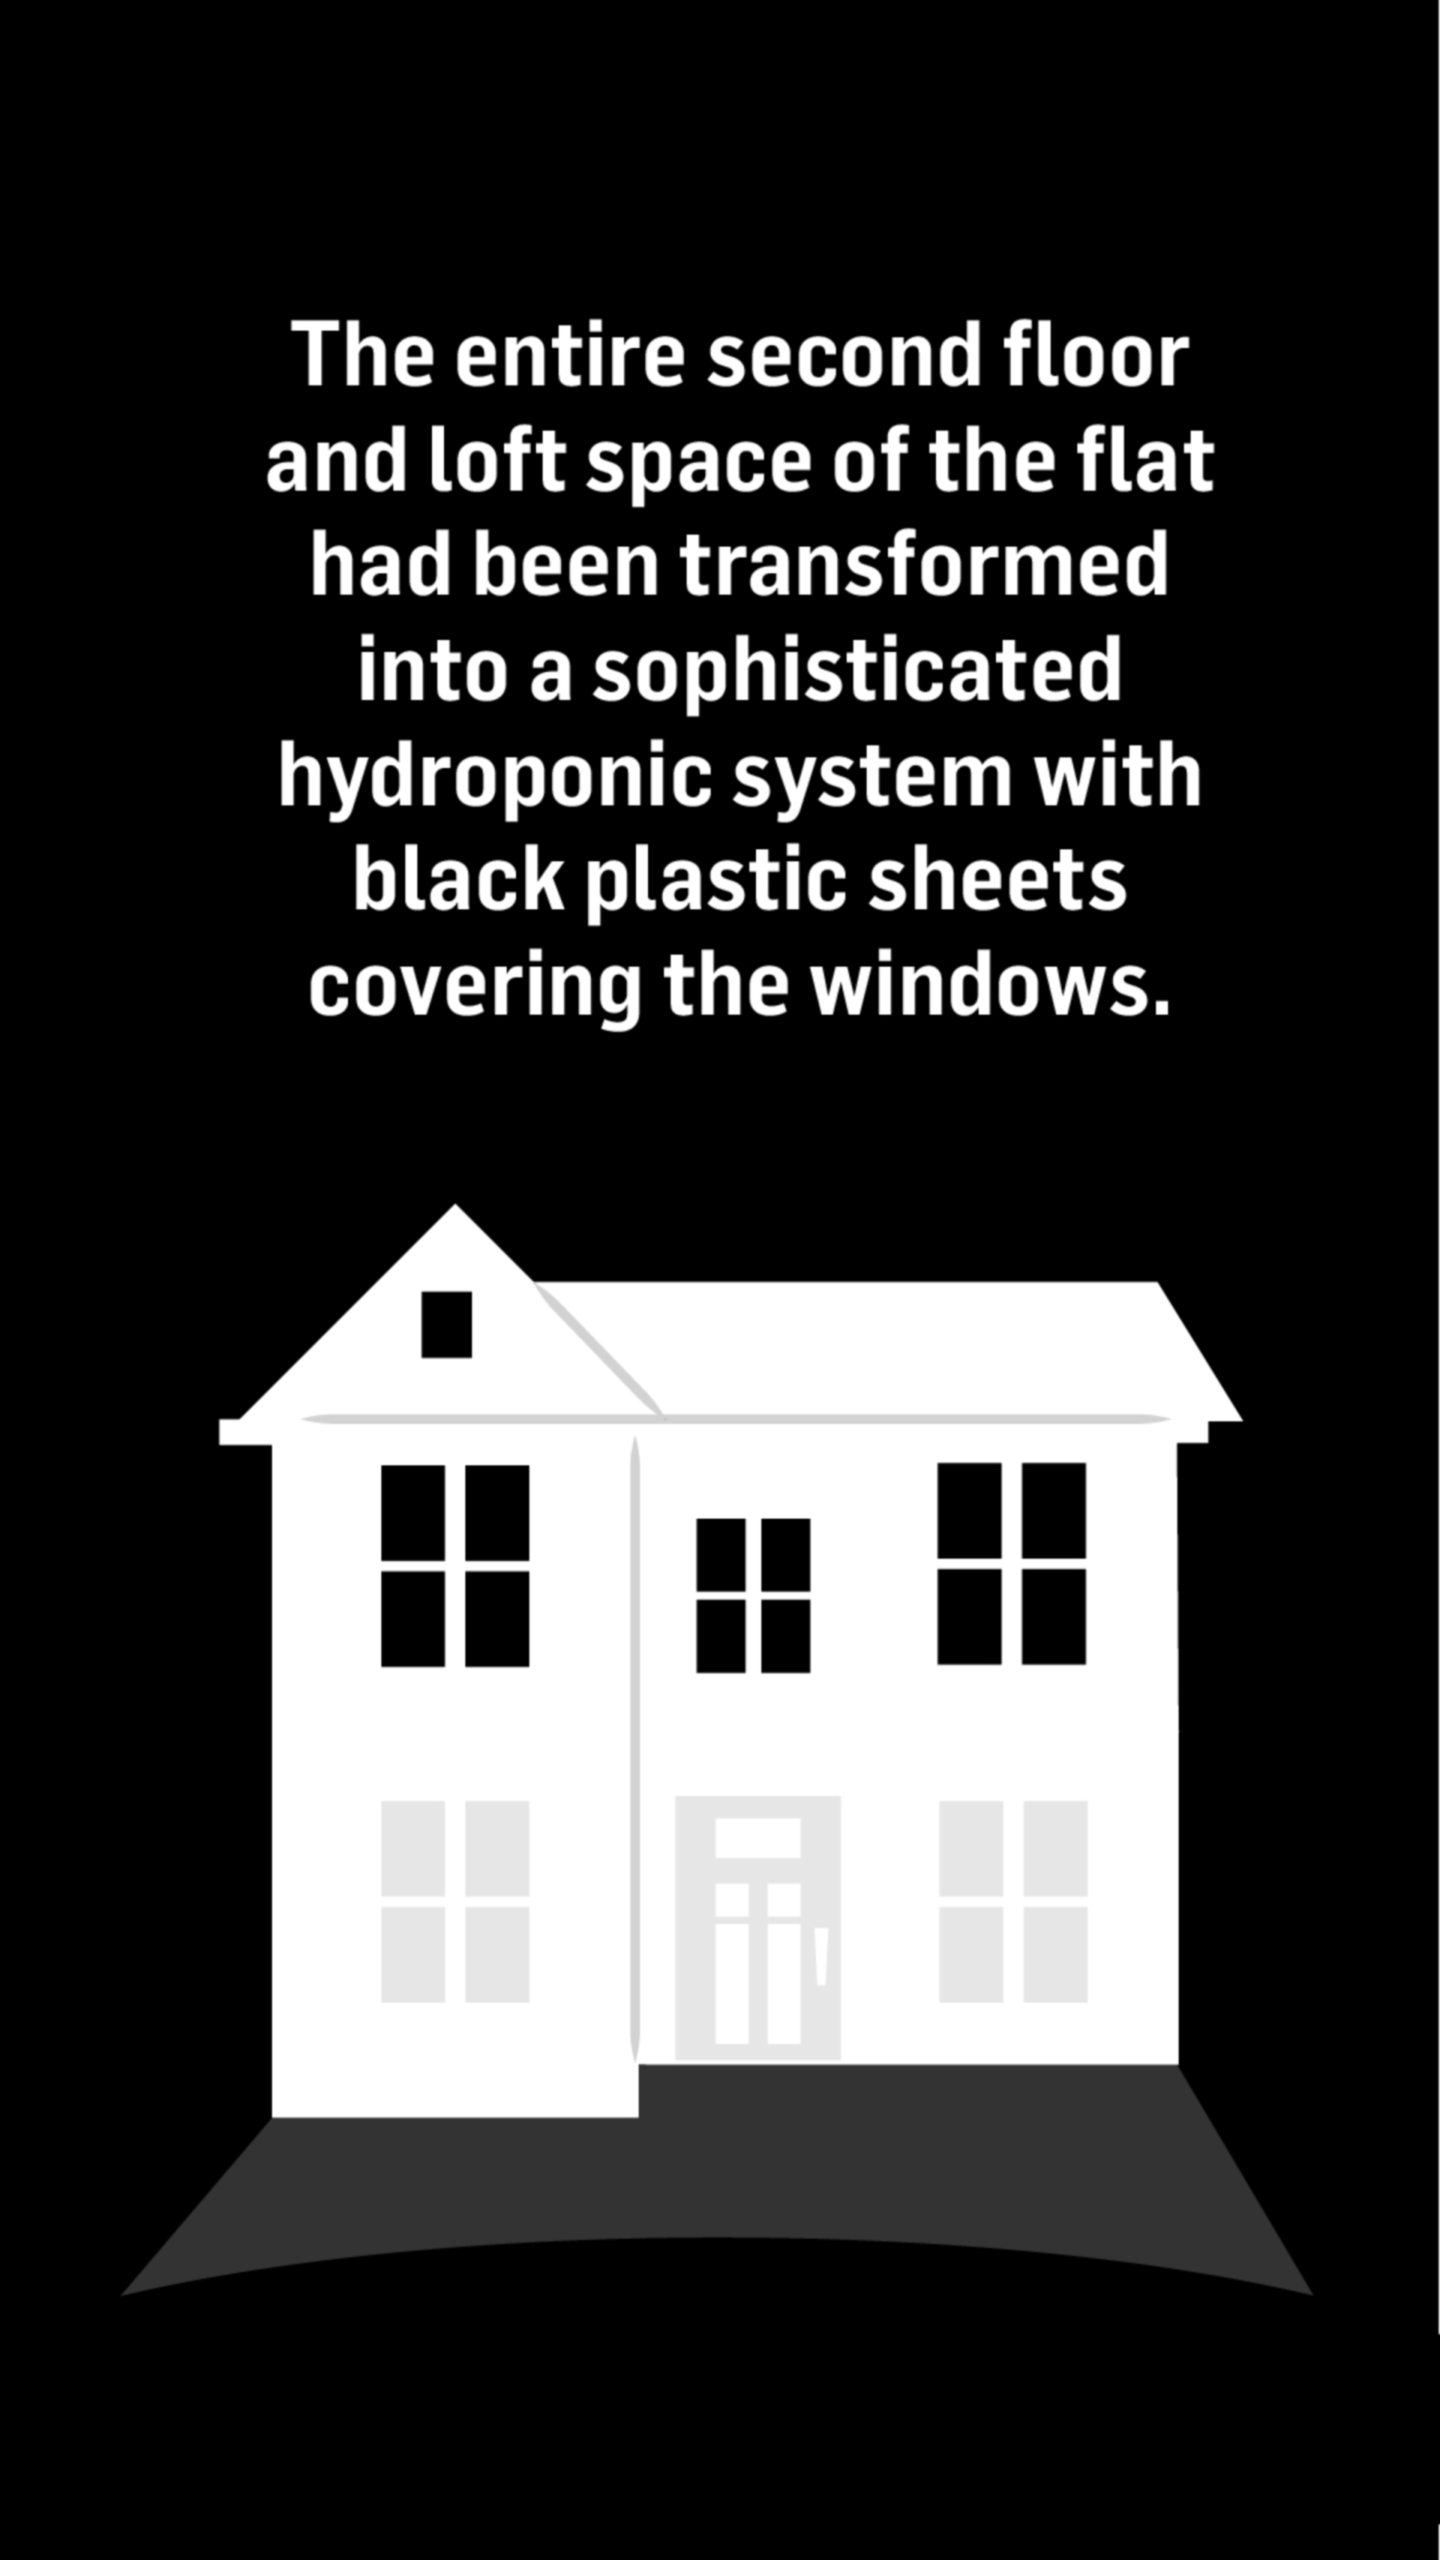 A white house with the top floor windows blackened out. Text above the house reads: The entire second floor and loft space of the flat had been transformed into a sophisticated hydroponic system with black plastic sheets covering the windows.